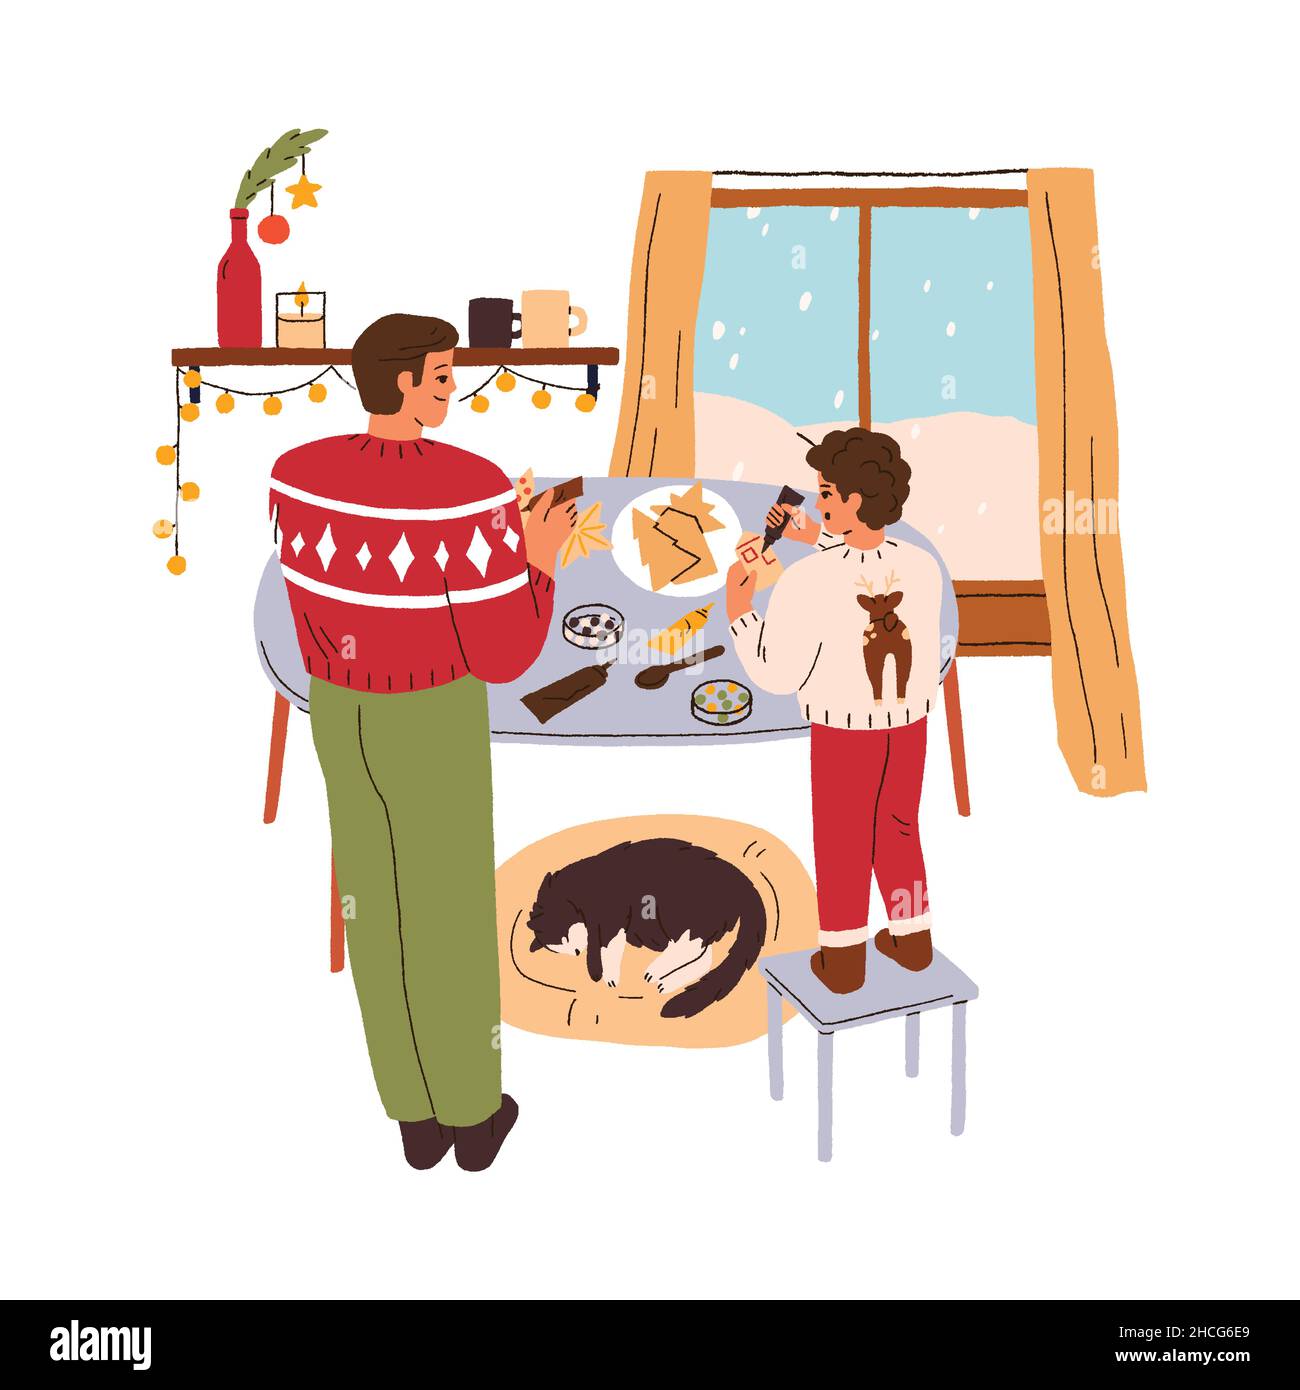 Father and son together making Christmas cake while pet sleeps under the table. Christmas spirit, red and green holiday celebration. Flat vector illus Stock Vector